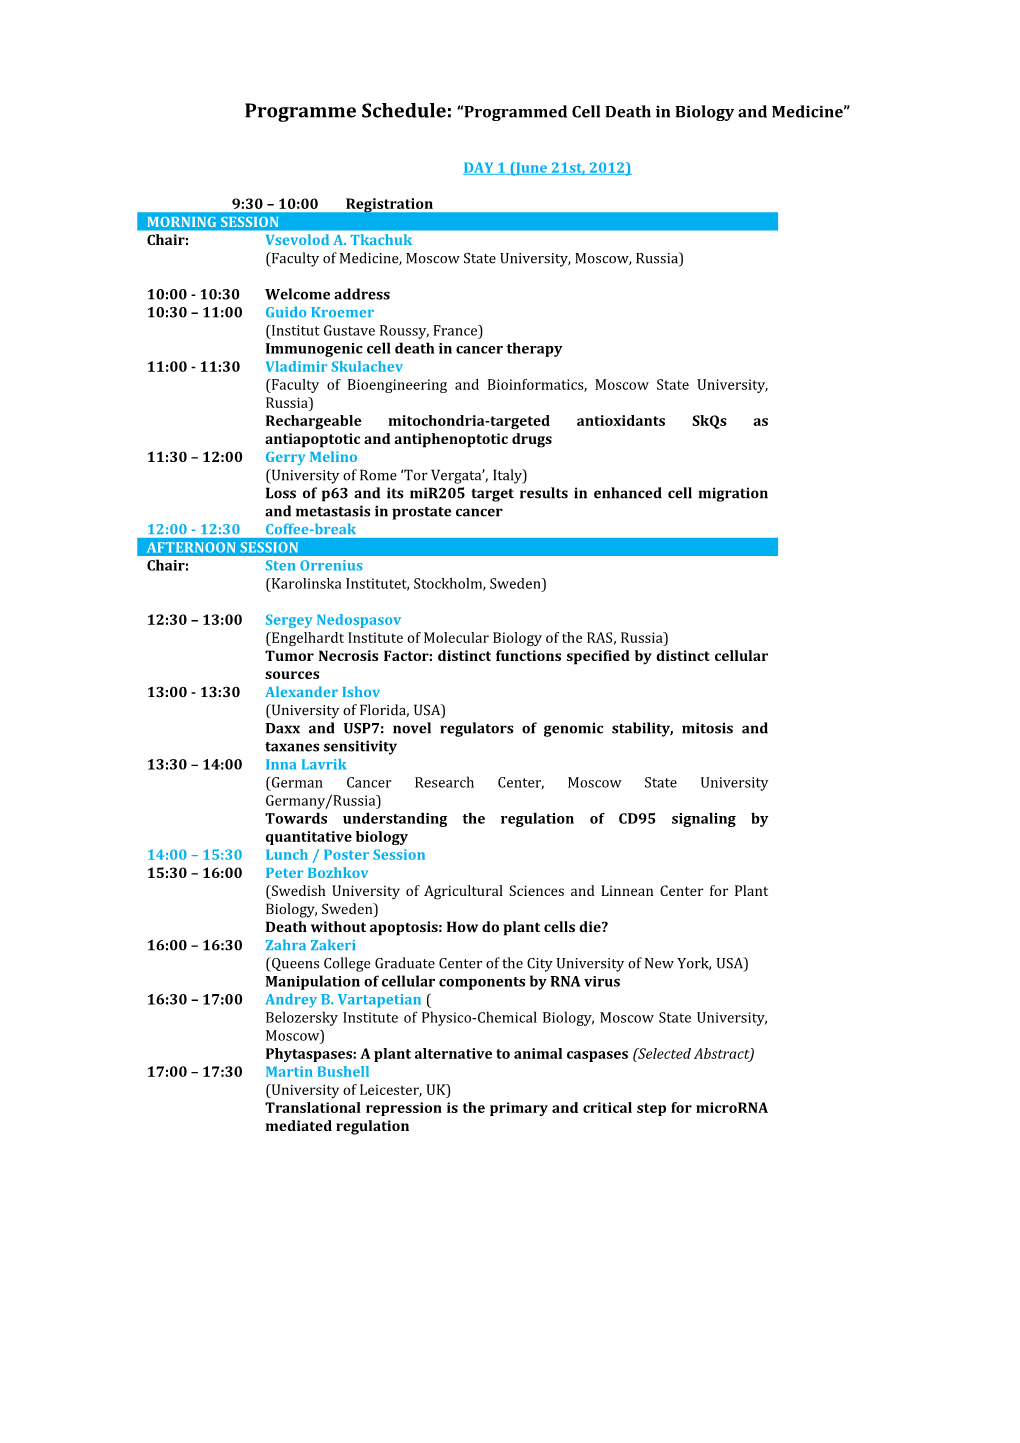 Programme Schedule: Programmed Cell Death in Biology and Medicine